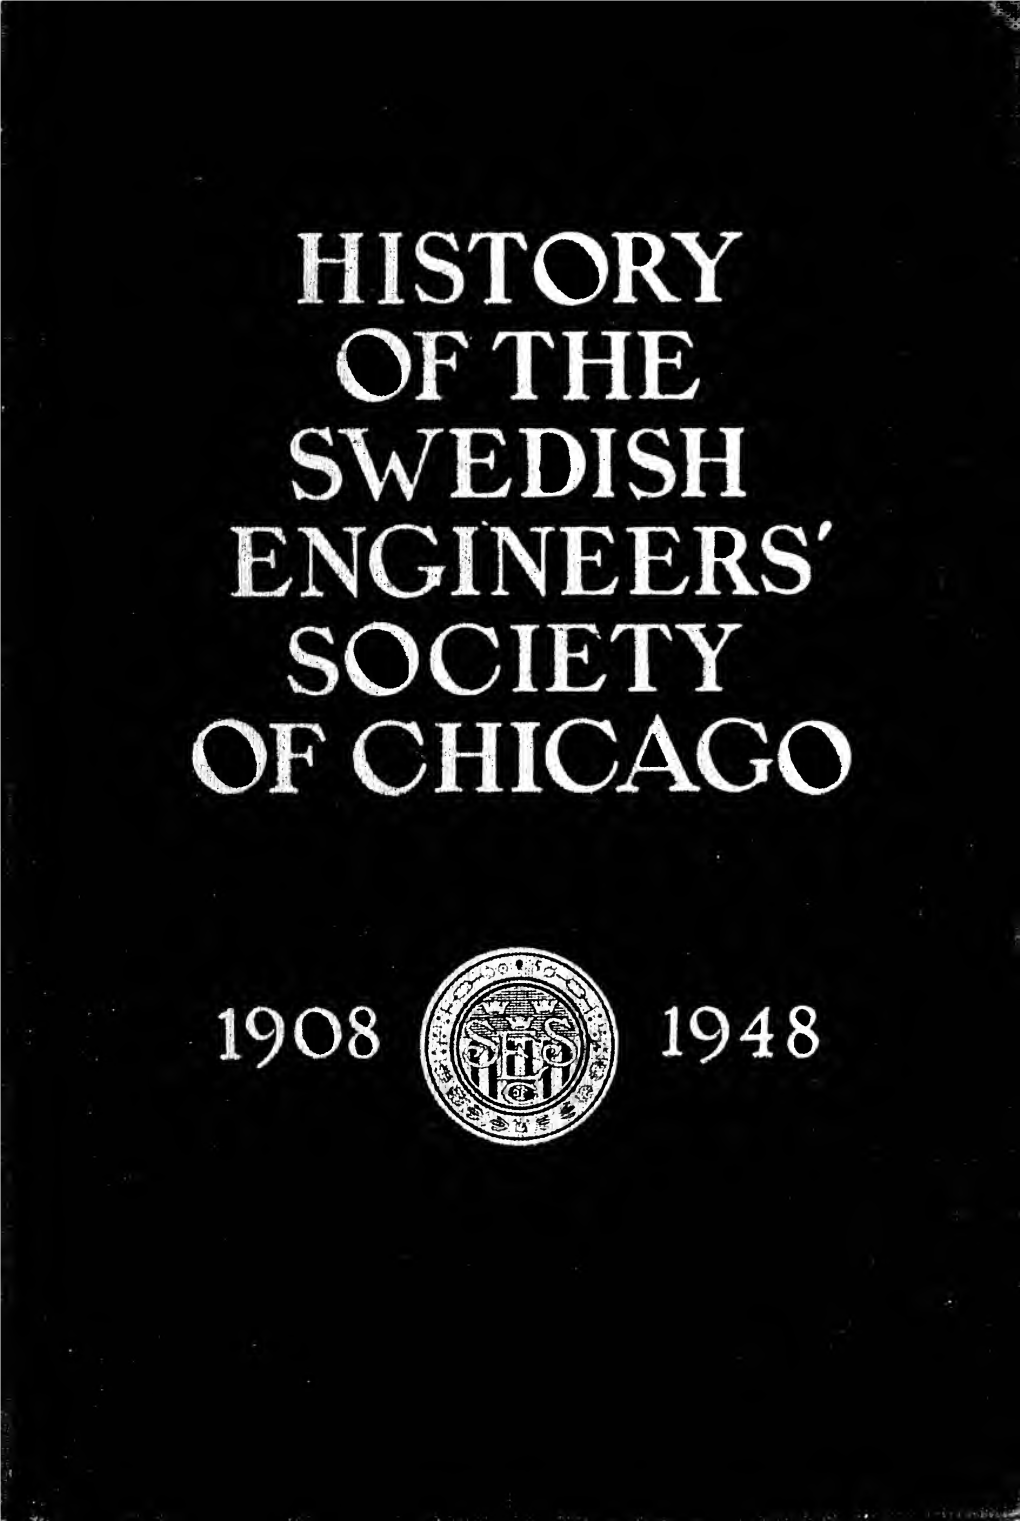 A History of the Swedish Engineers' Society of Chicago, 1908-1948